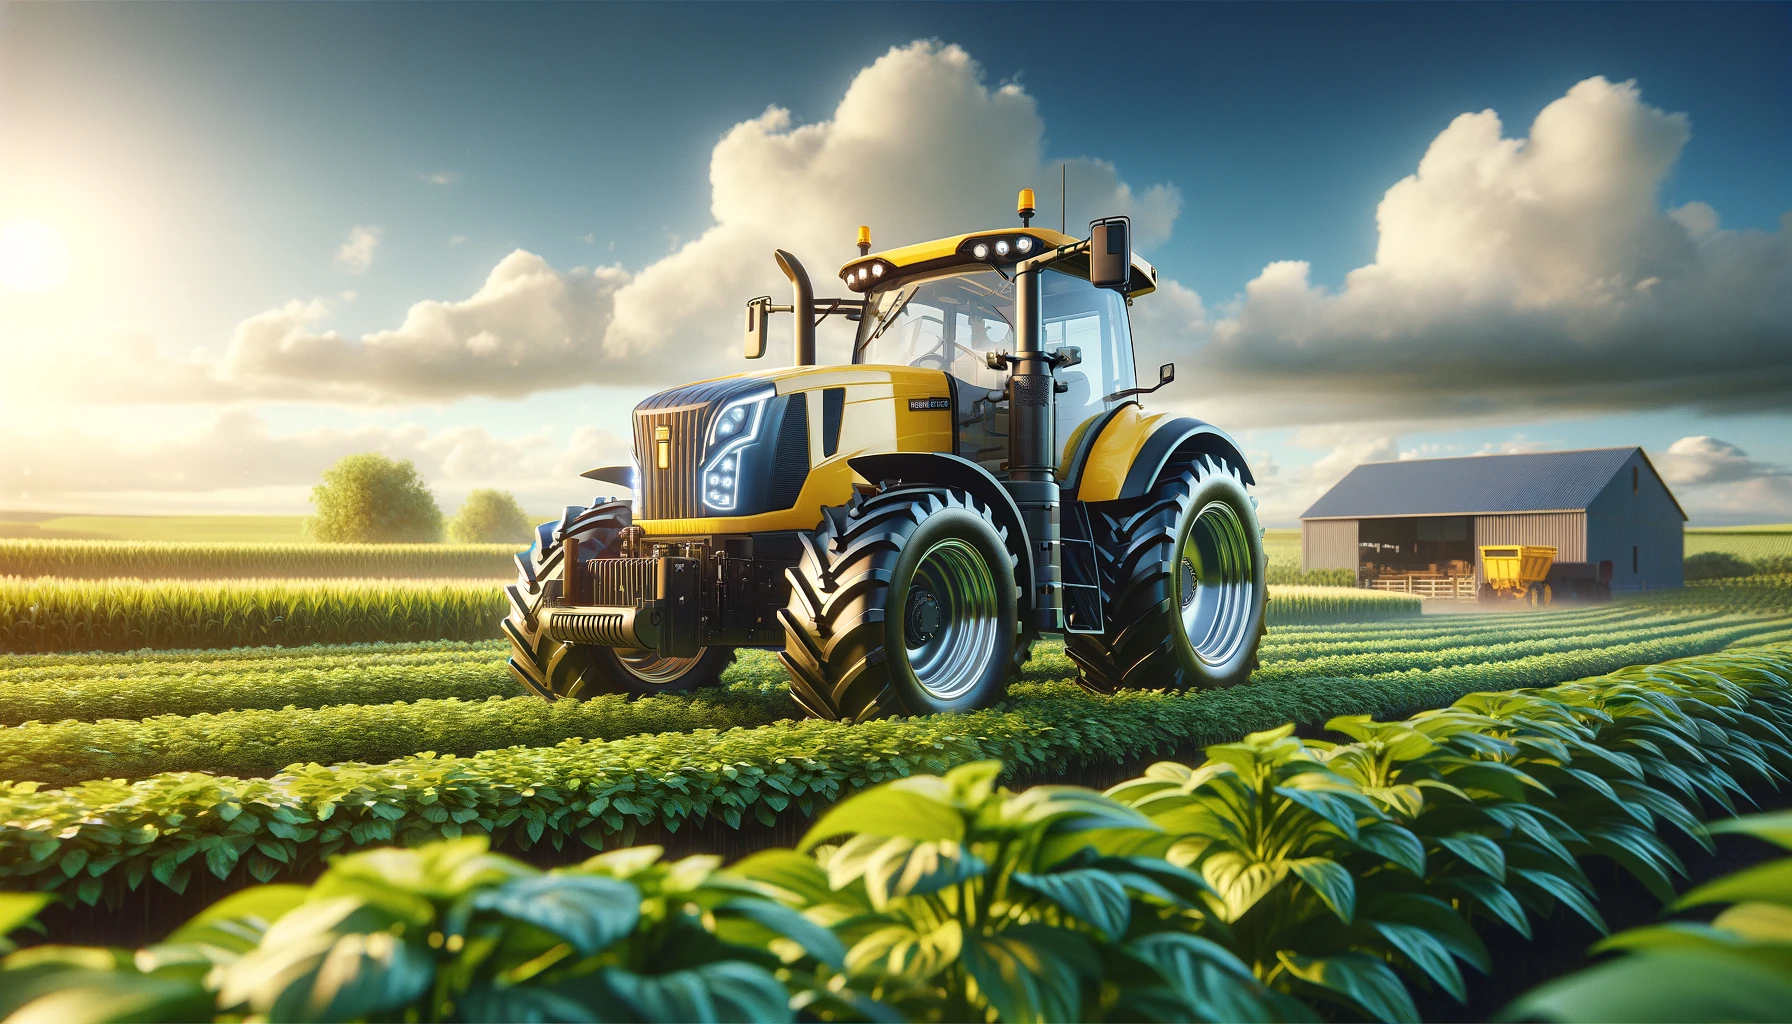 image of a modern, sleek tractor in a scenic agricultural field. The tractor is yellow